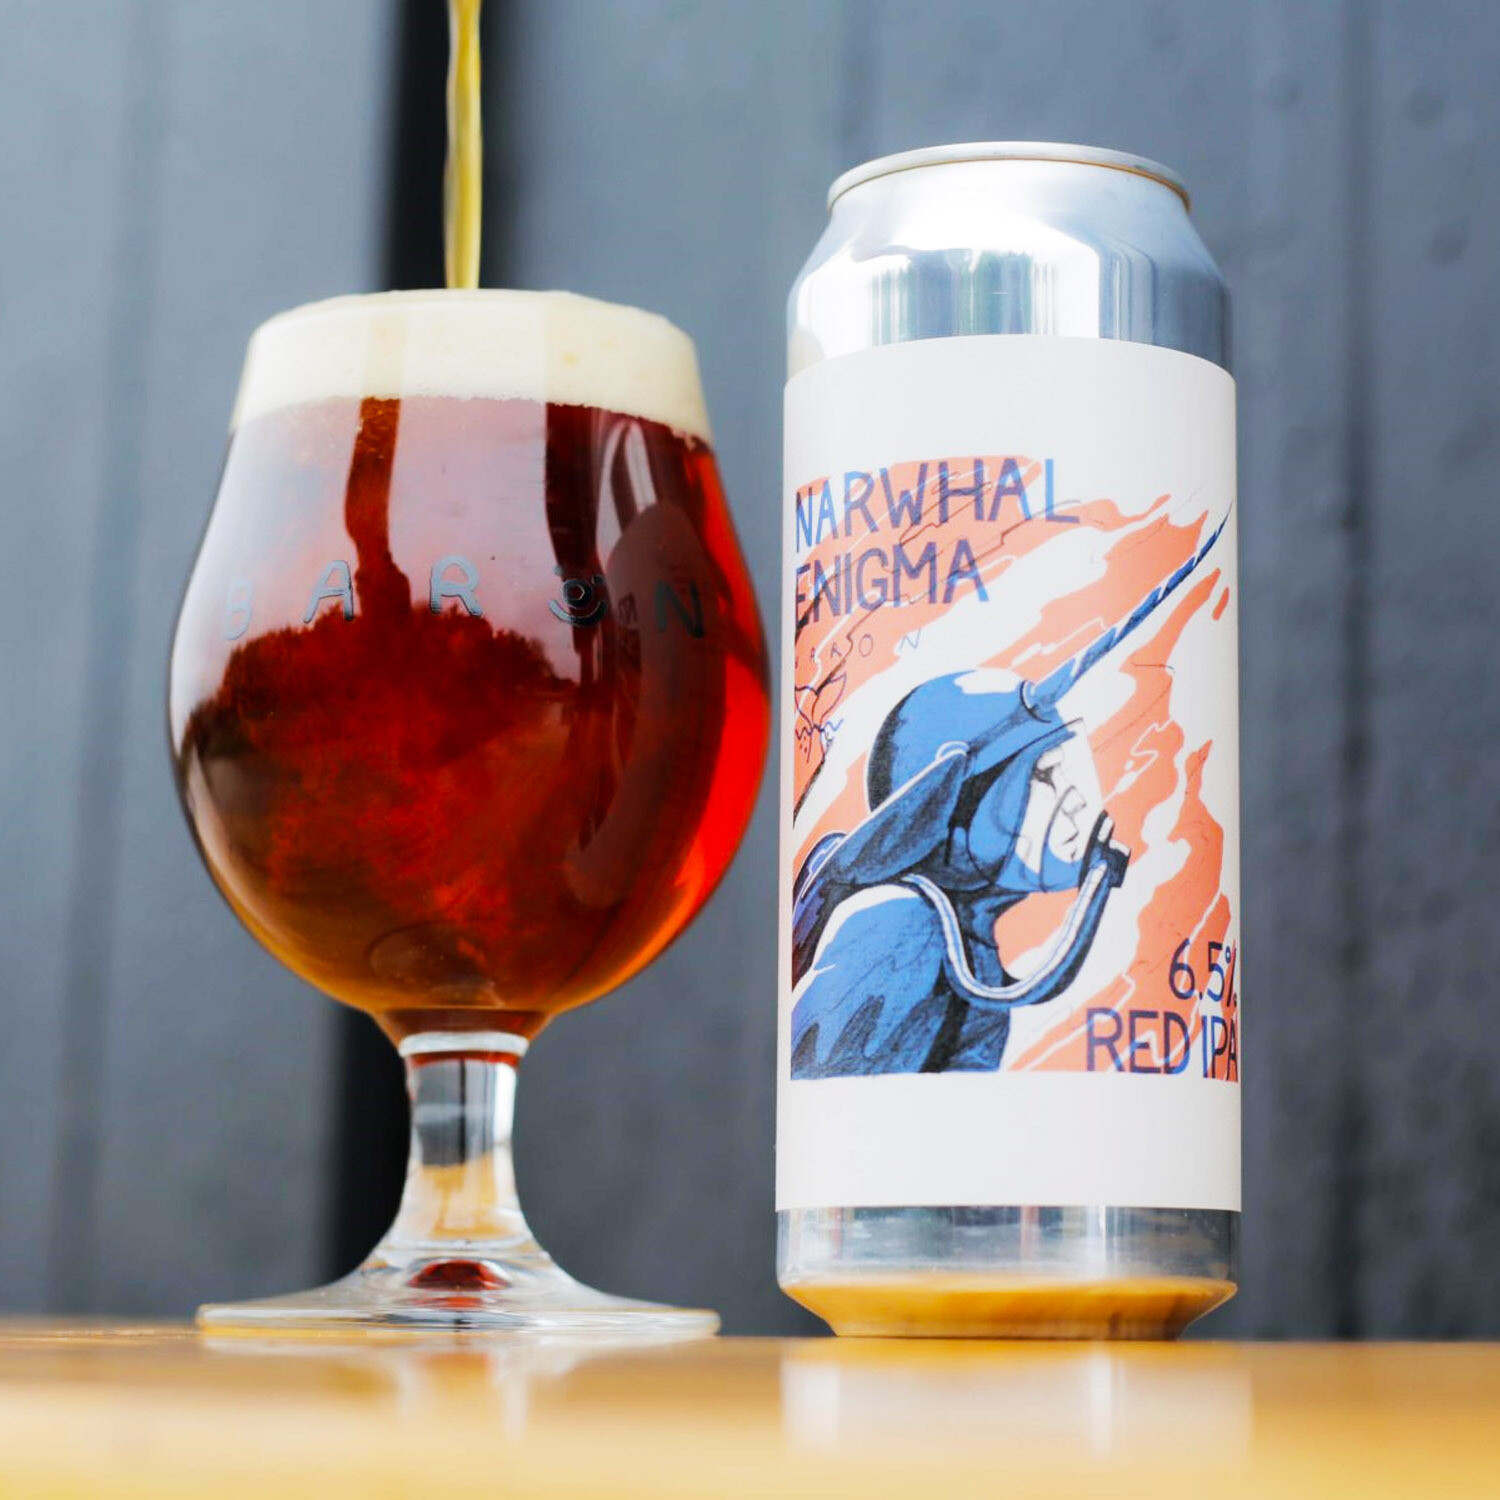 Baron Narwhal Enigma Red IPA